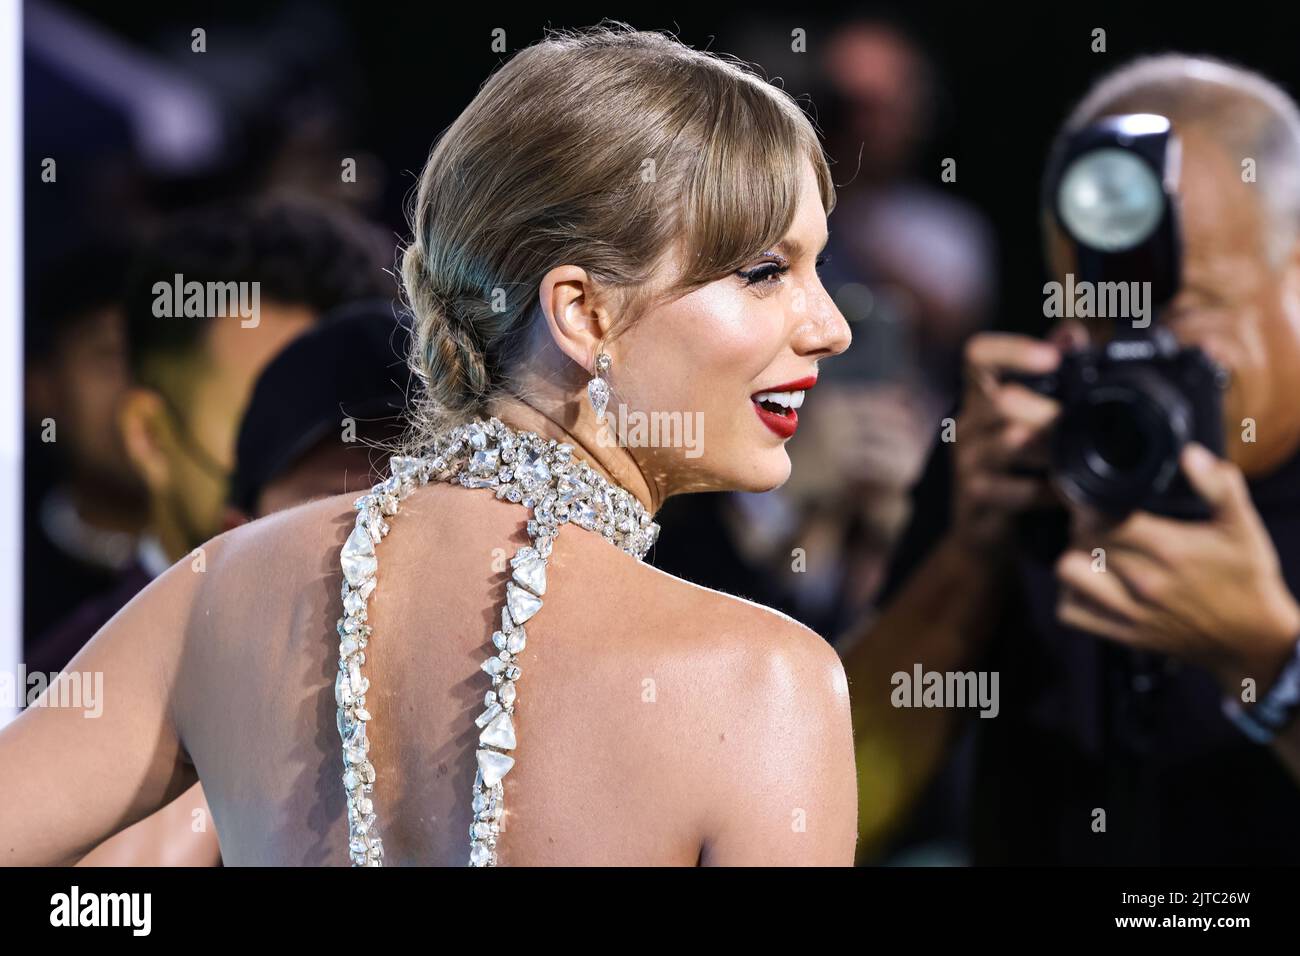 Newark, United States. 29th Aug, 2022. NEWARK, NEW JERSEY, USA - AUGUST 28: Taylor Swift wearing an Oscar de la Renta dress, Christian Louboutin shoes, and Lorraine Schwartz jewelry arrives at the 2022 MTV Video Music Awards held at the Prudential Center on August 28, 2022 in Newark, New Jersey, United States. (Photo by Xavier Collin/Image Press Agency) Credit: Image Press Agency/Alamy Live News Stock Photo